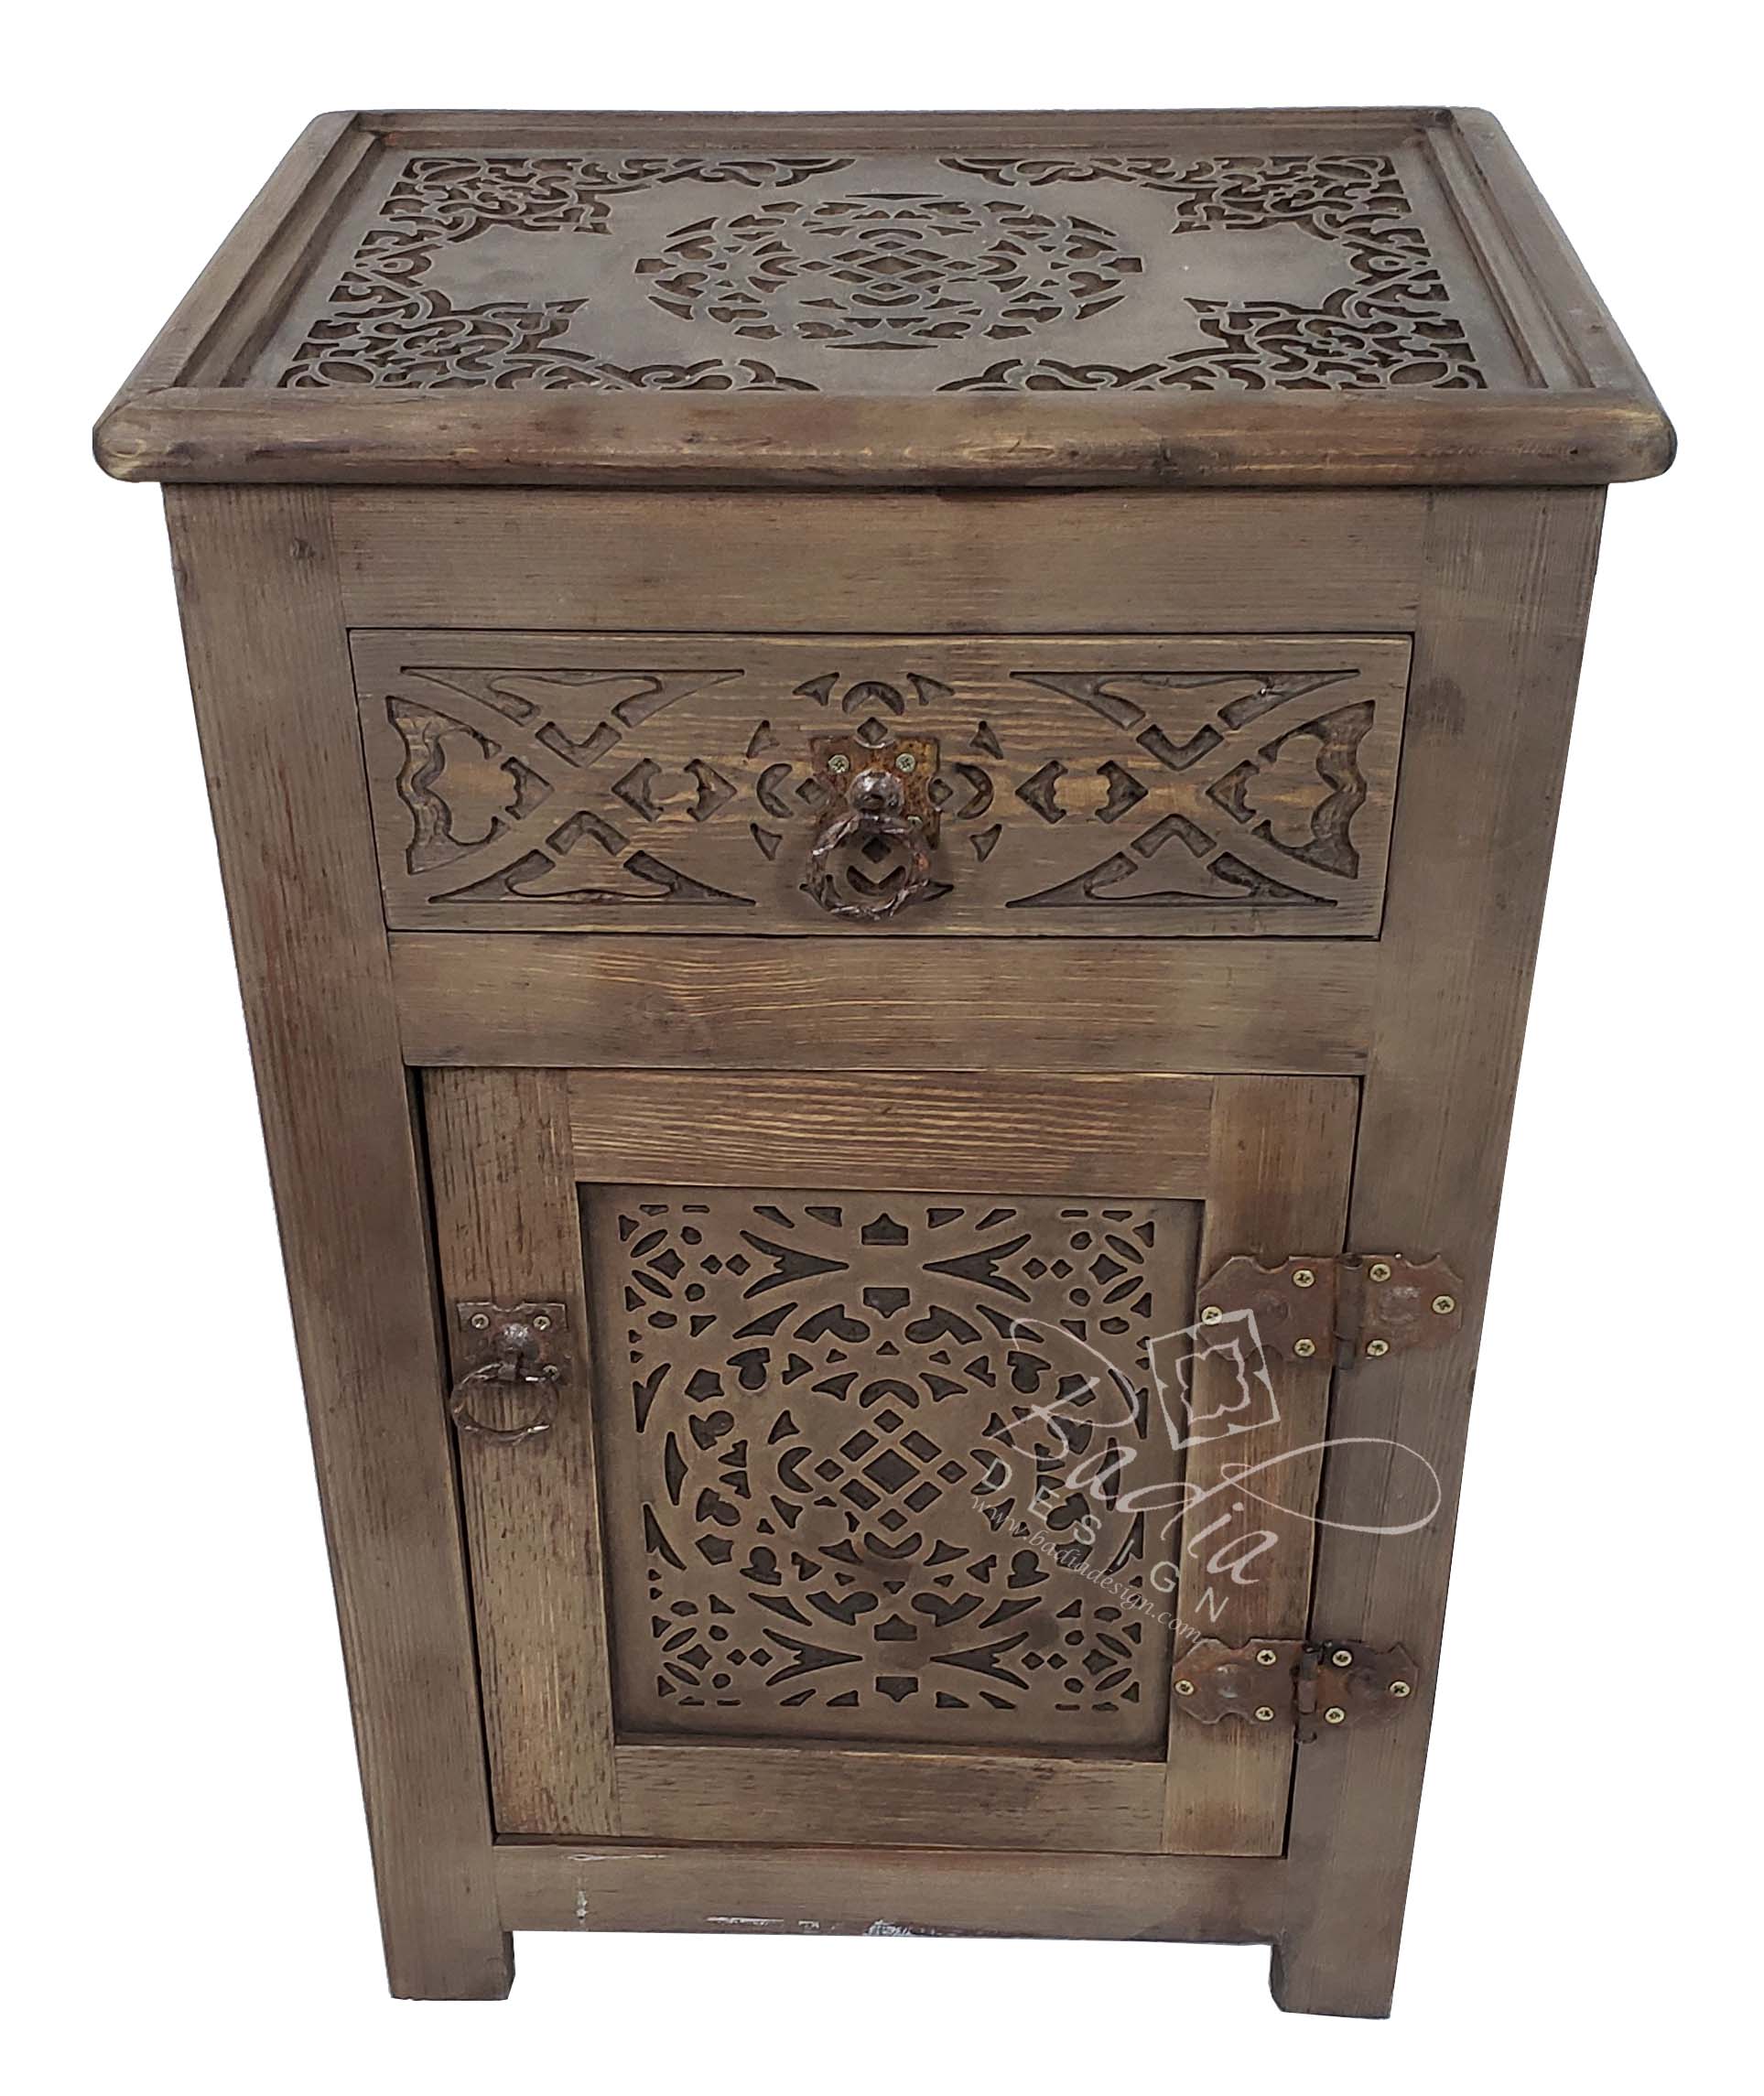 moroccan-hand-carved-wooden-nightstand-cw-ns0051.jpg